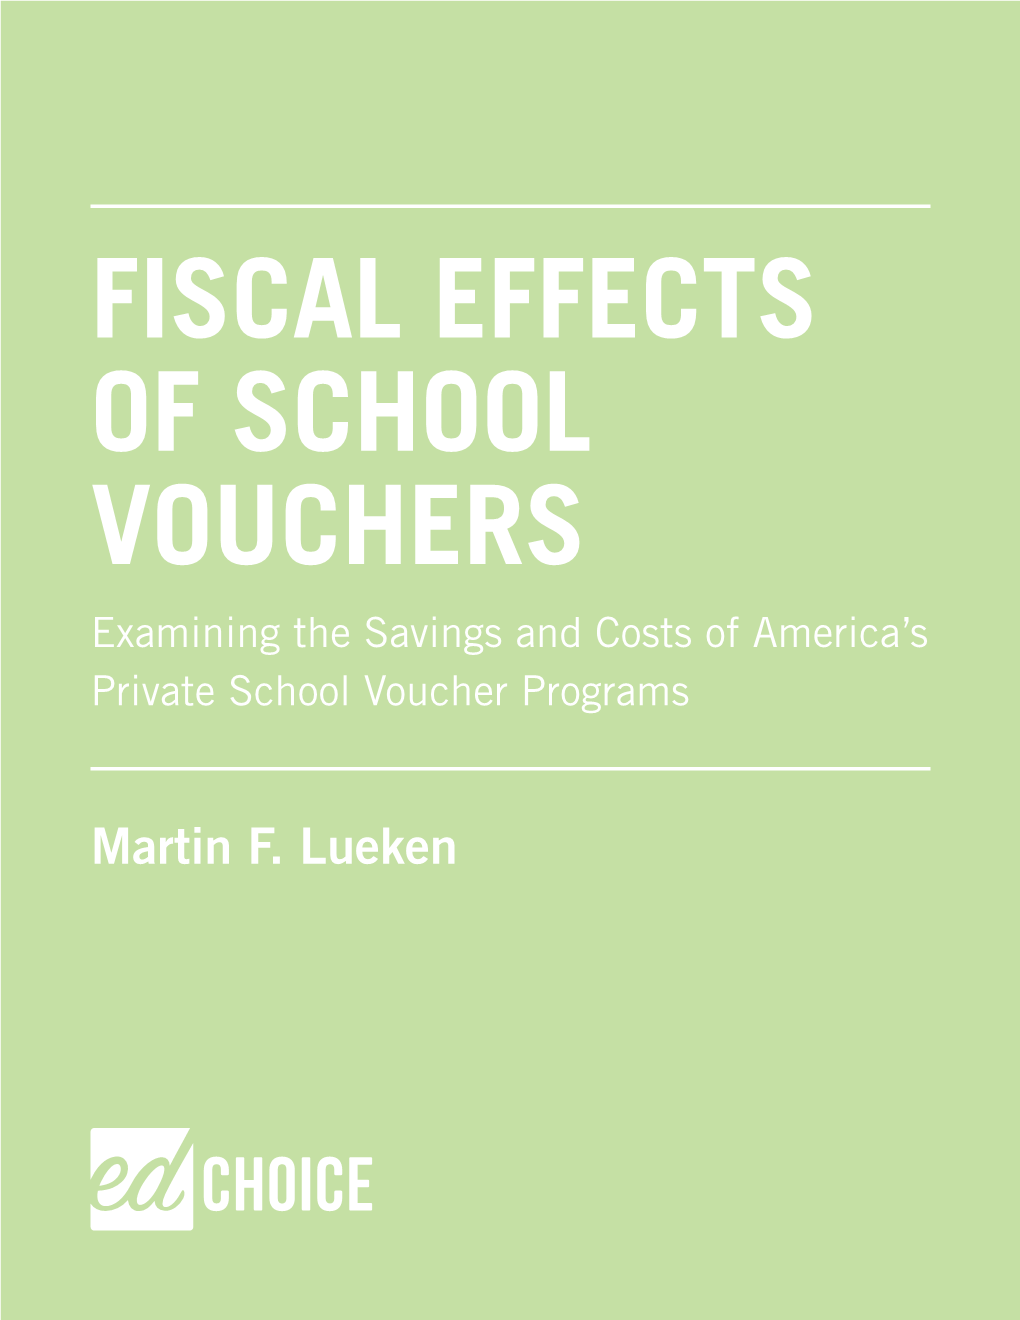 Fiscal Effects of Schools Vouchers